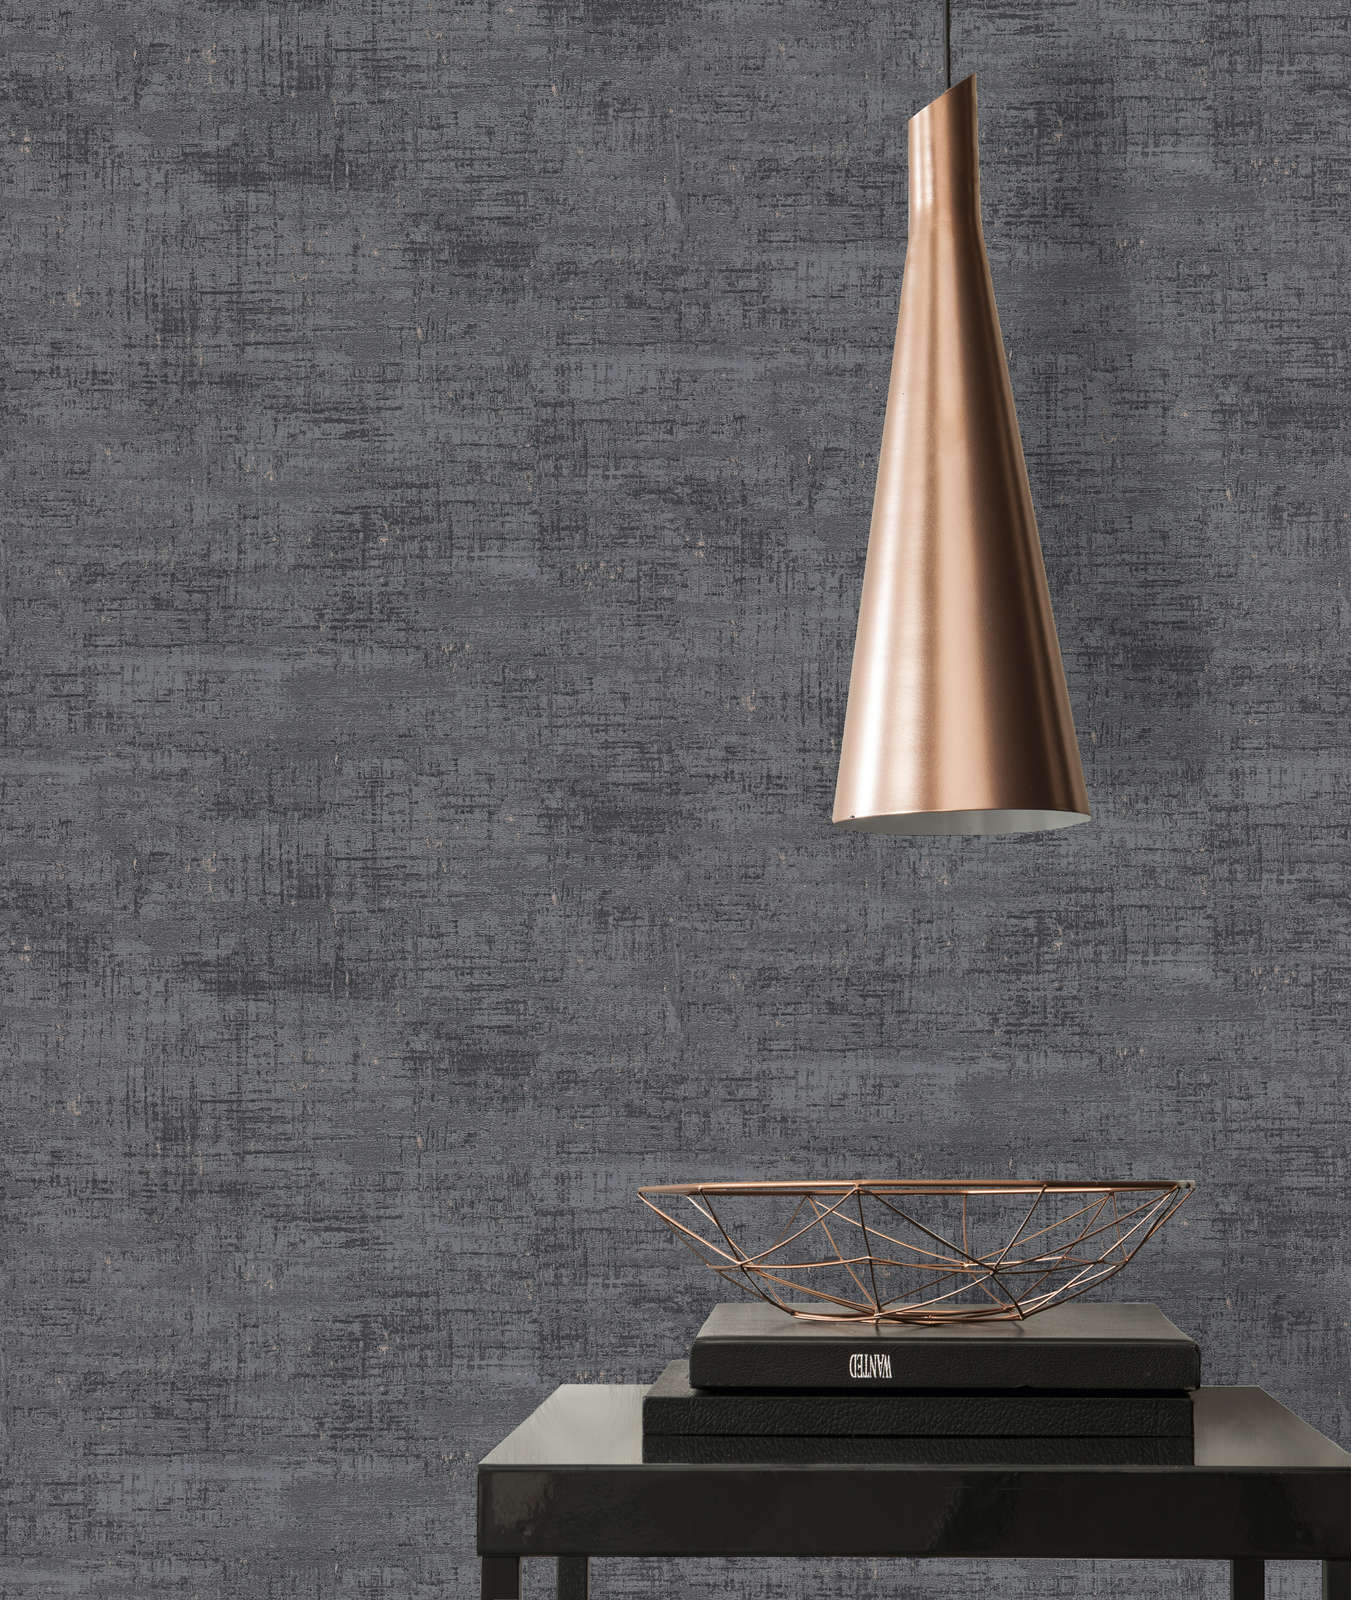             Non-woven wallpaper with a textured rust effect - black, grey, gold
        